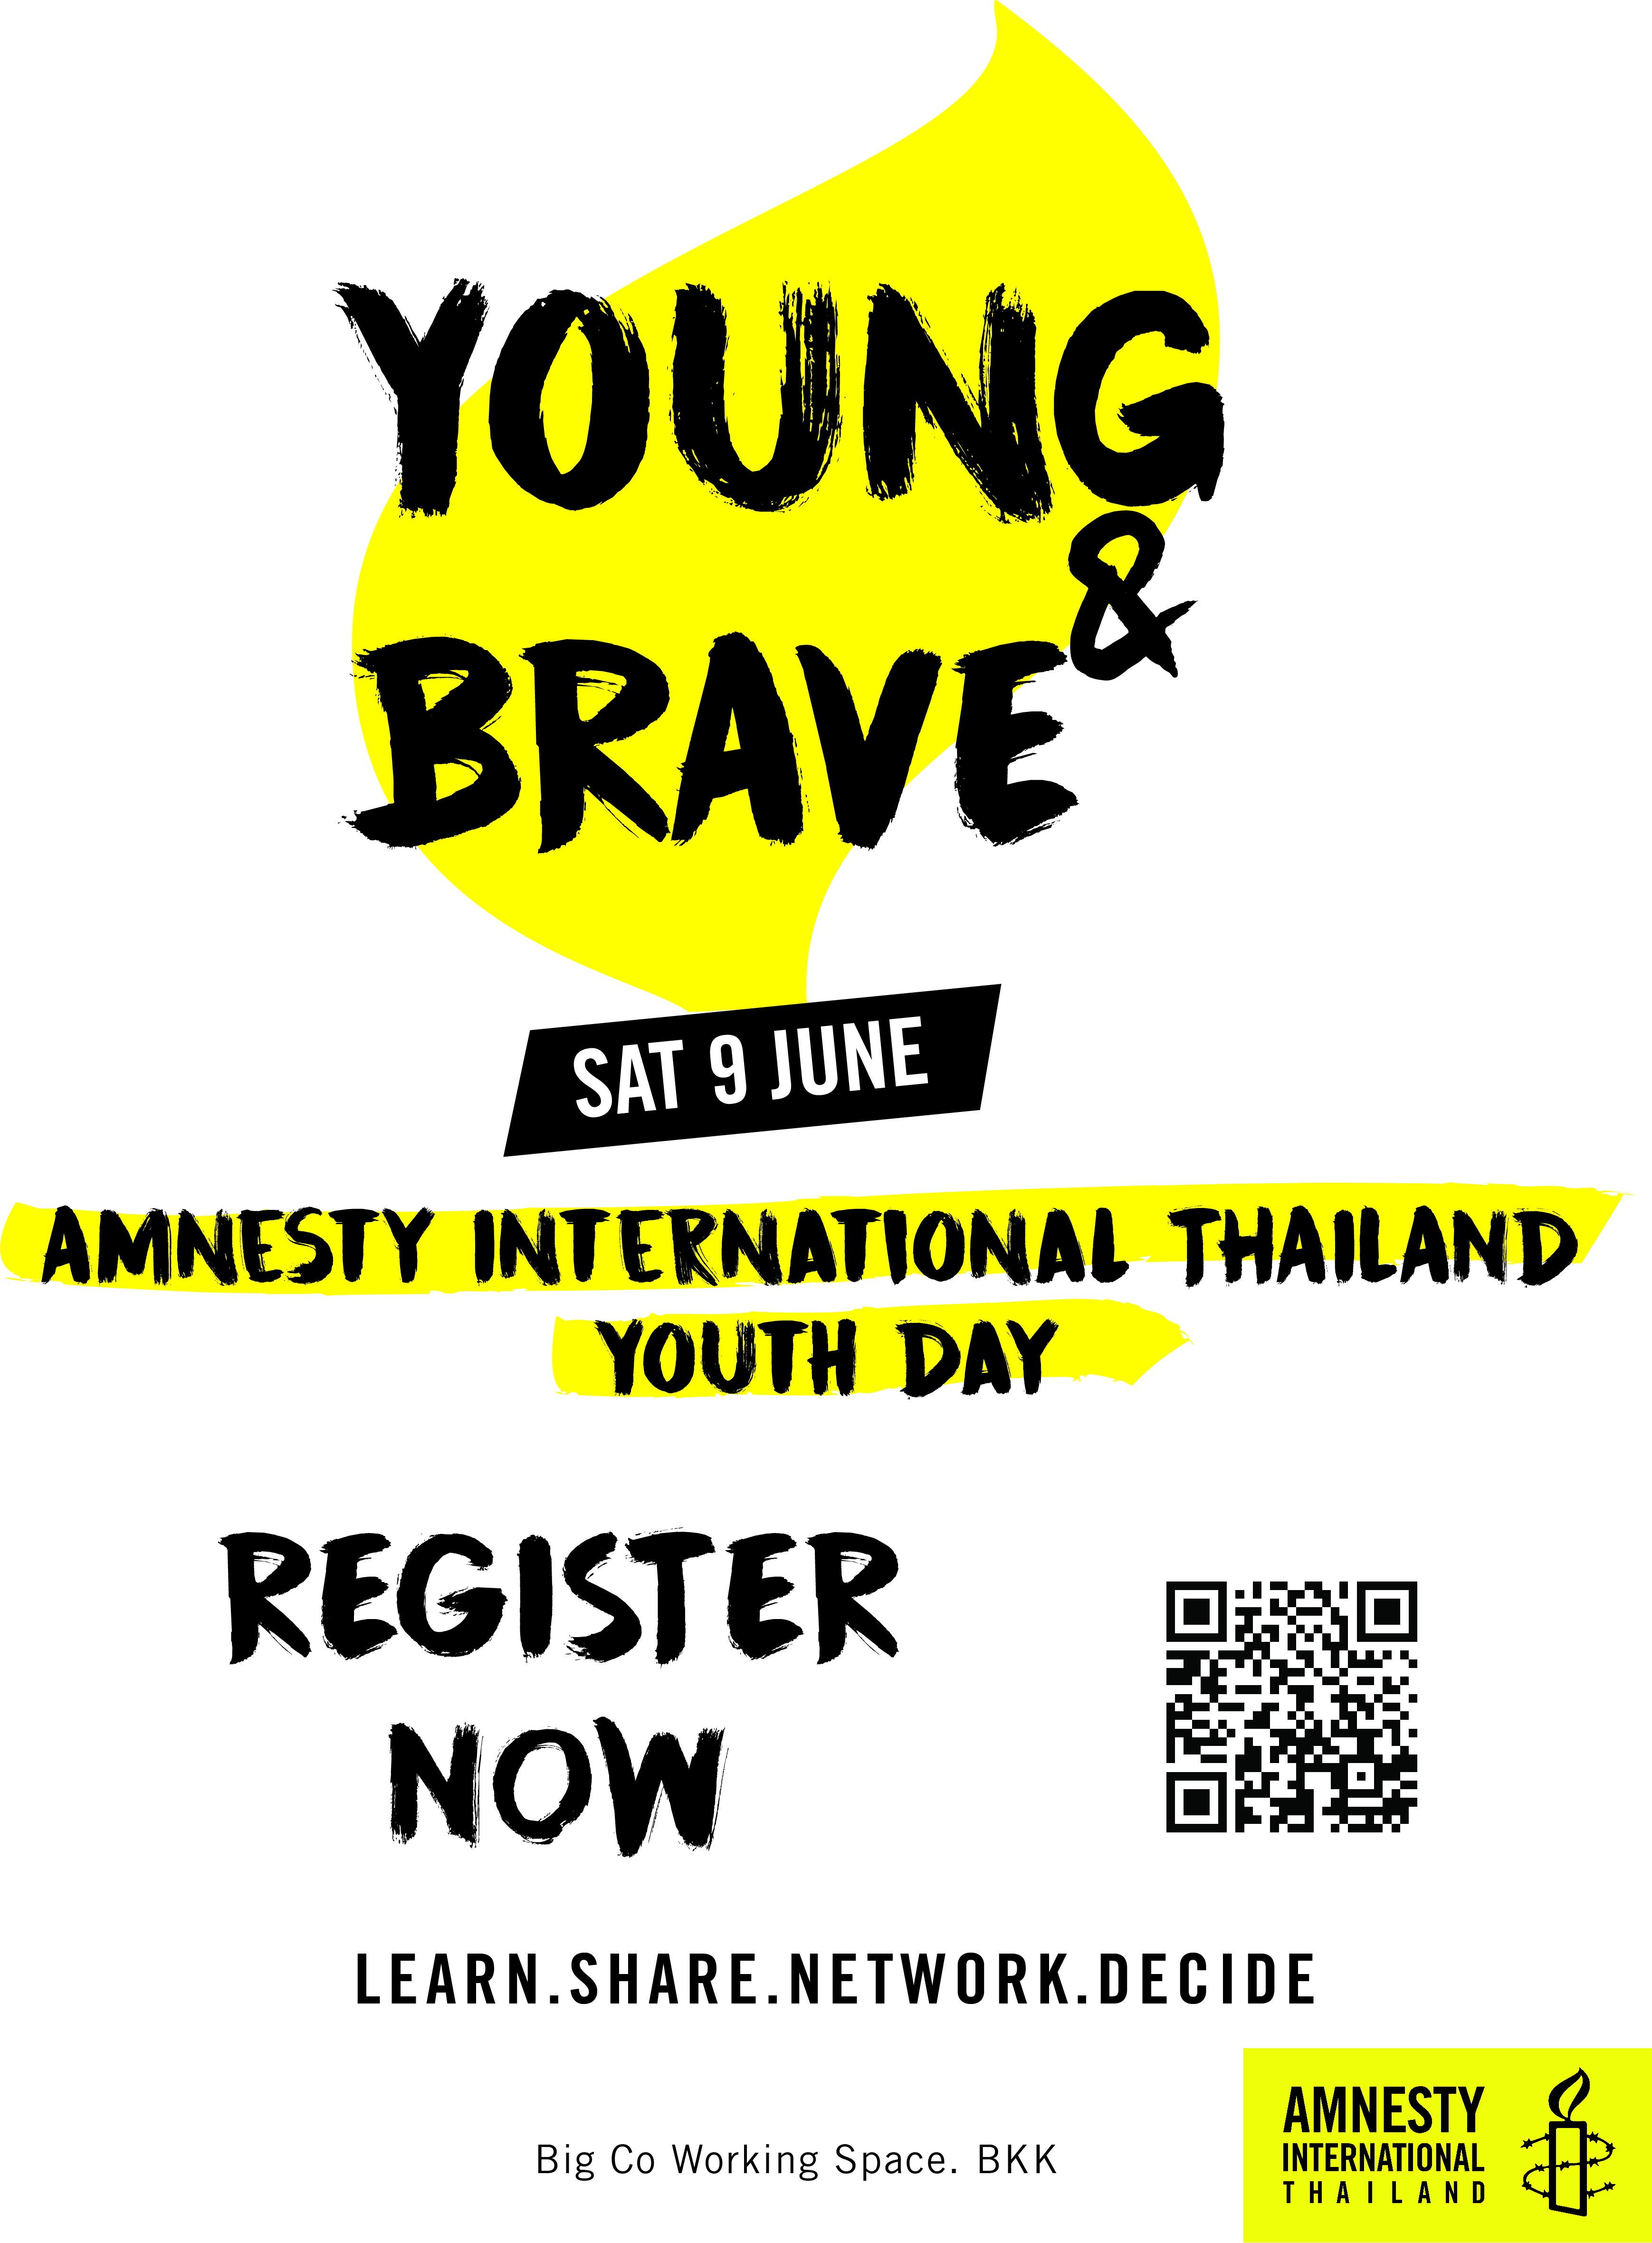 Poster.youth day.jpg